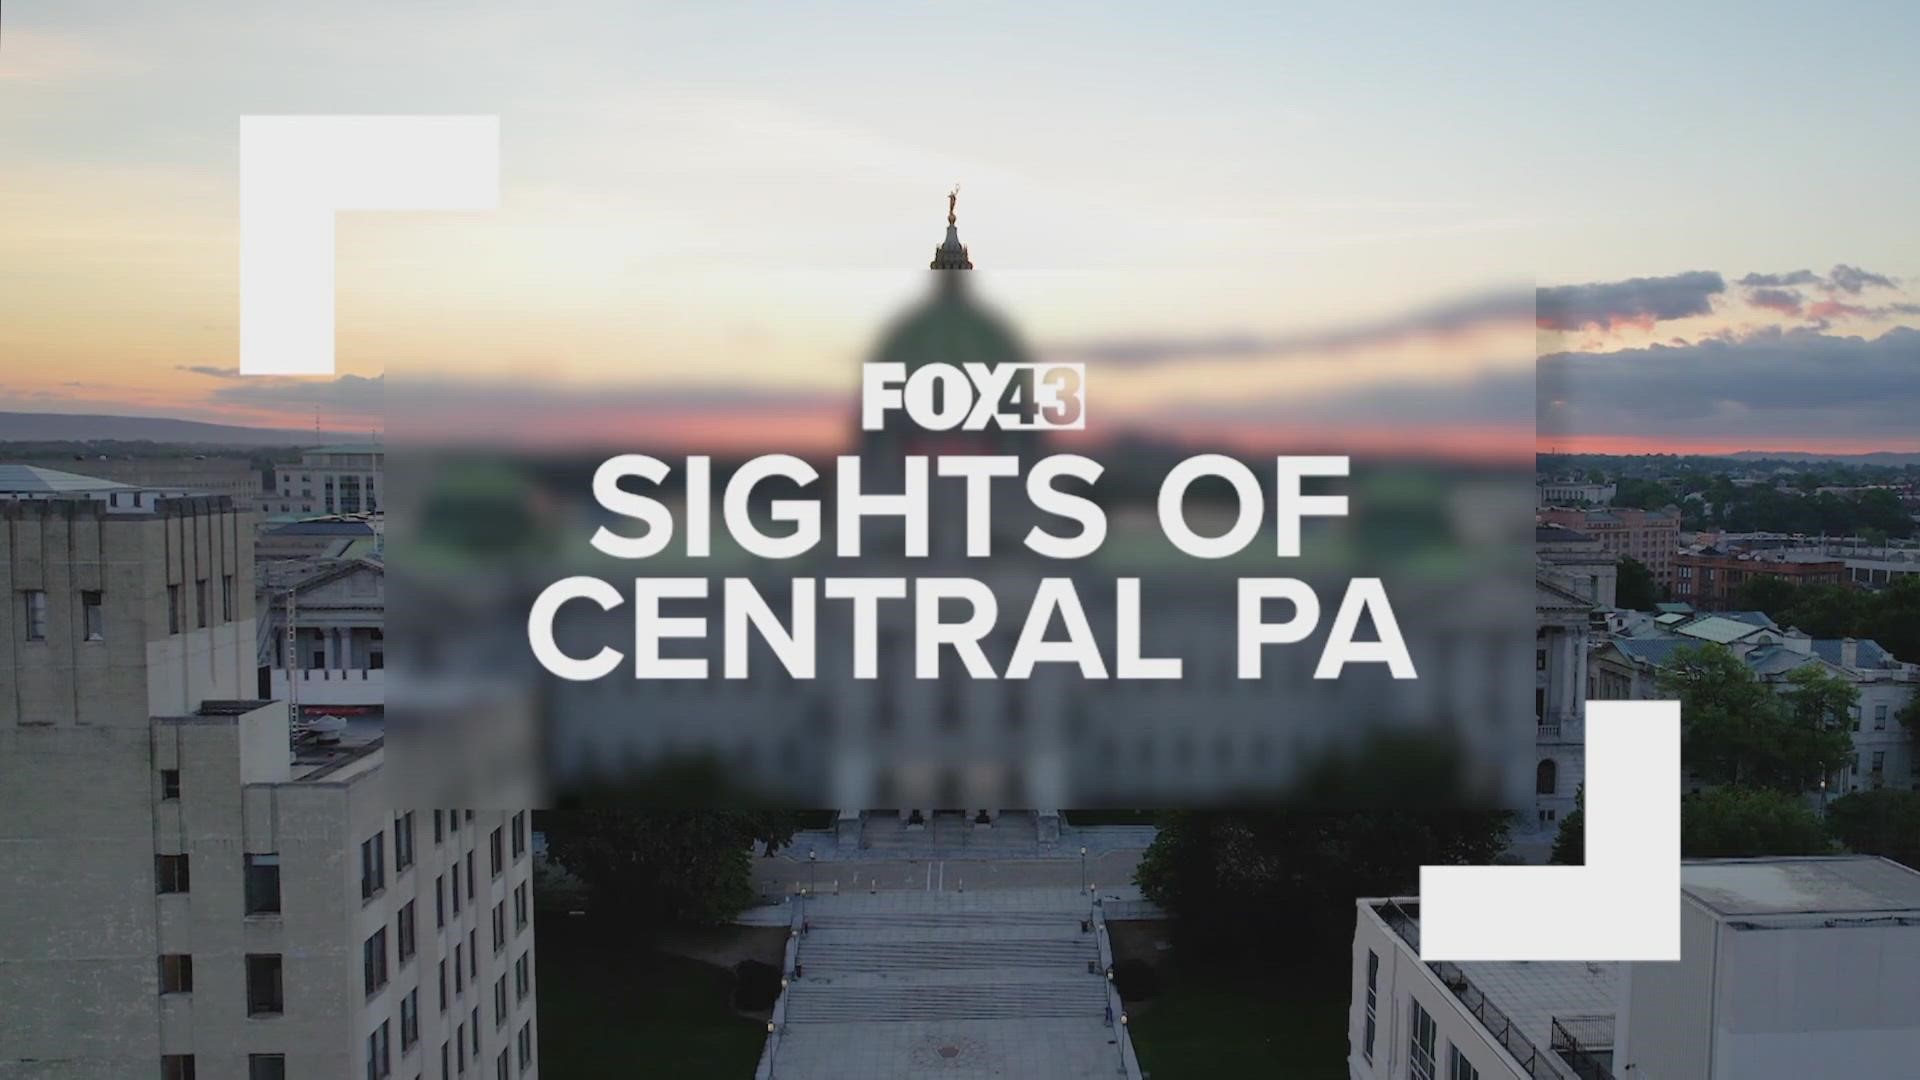 WPMT-FOX43 flew a drone over Pennsylvania's State Capitol in Harrisburg, as well as the surrounding area to capture the views of the city.